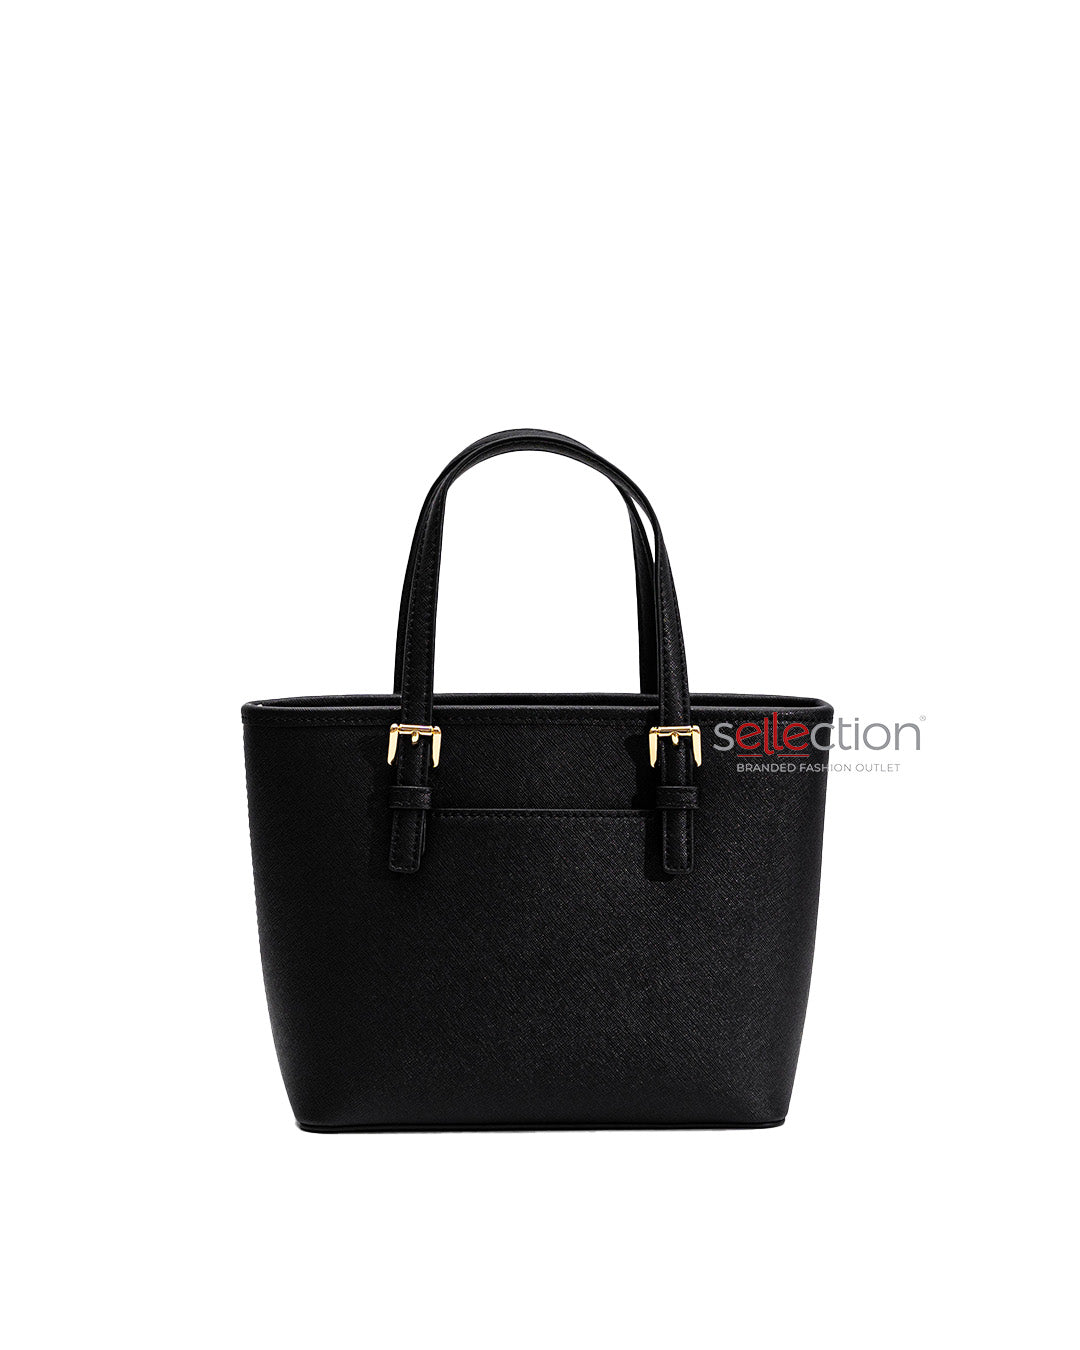 Load image into Gallery viewer, Michael Kors Jet Set Xs Carryall Tote In Black
